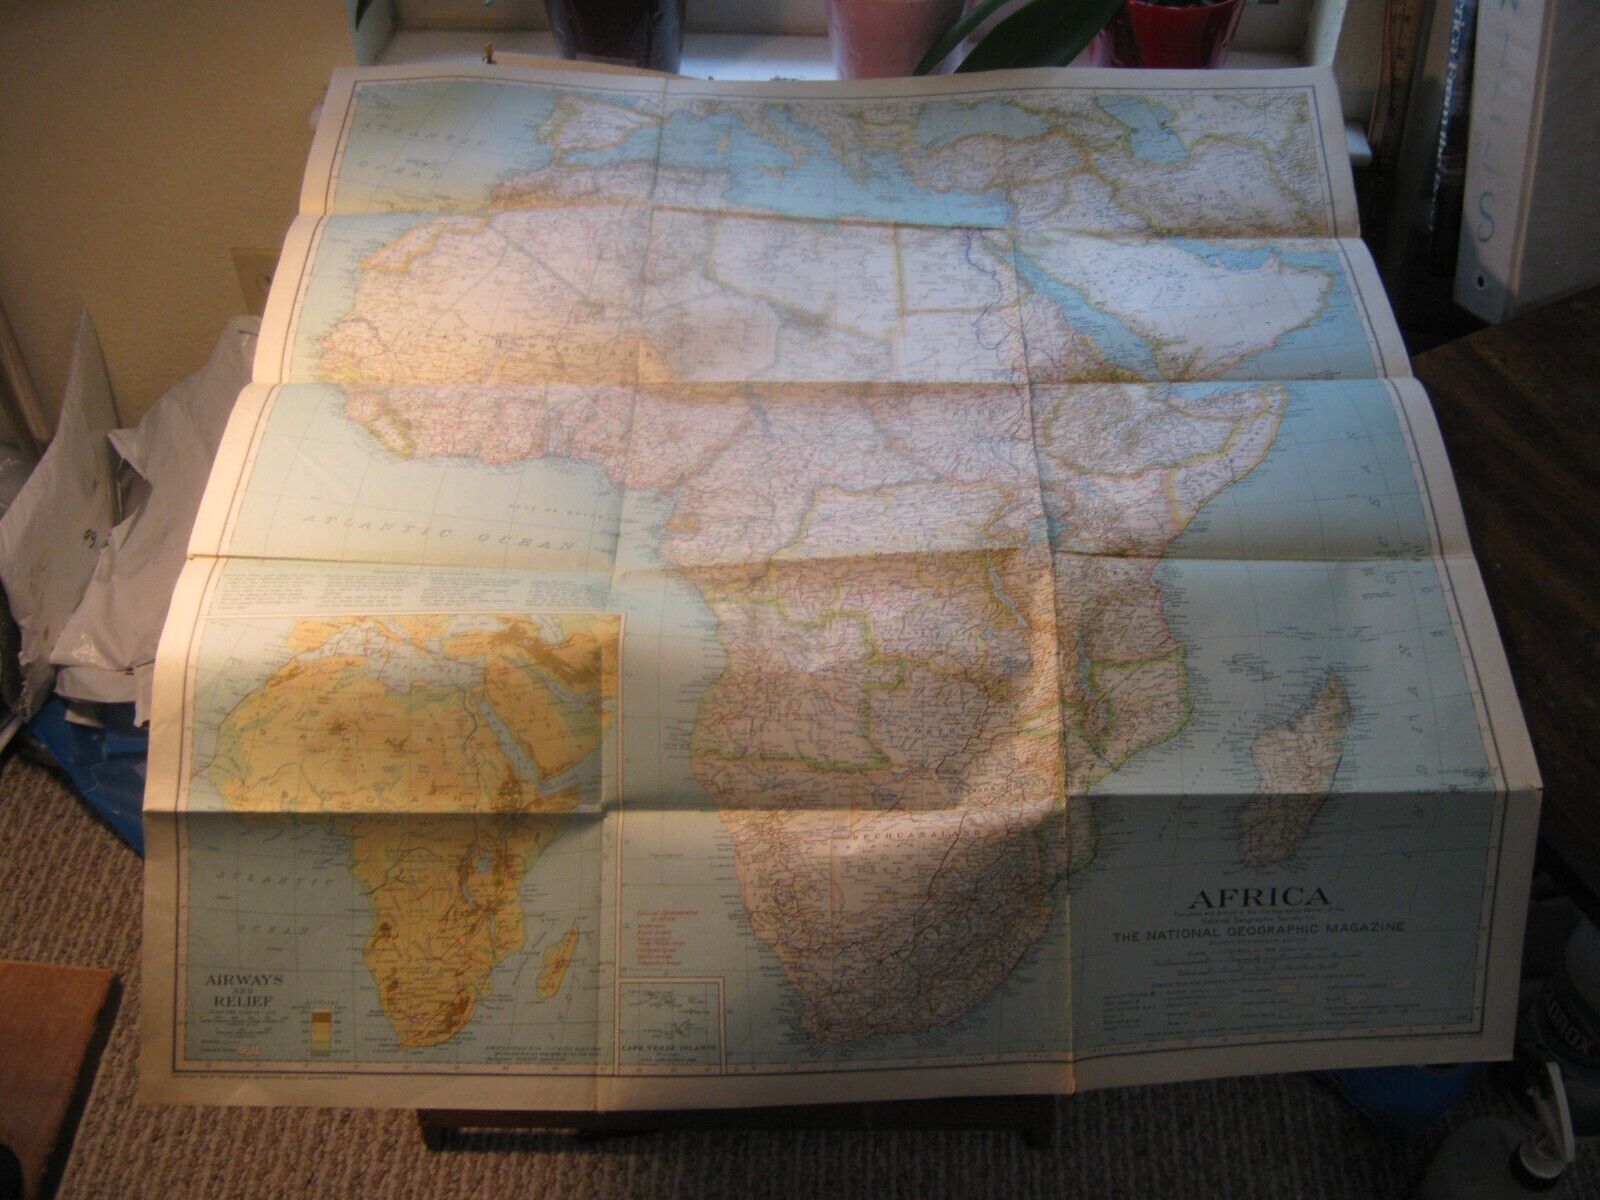 ANTIQUE AFRICA MAP June 1935 National Geographic